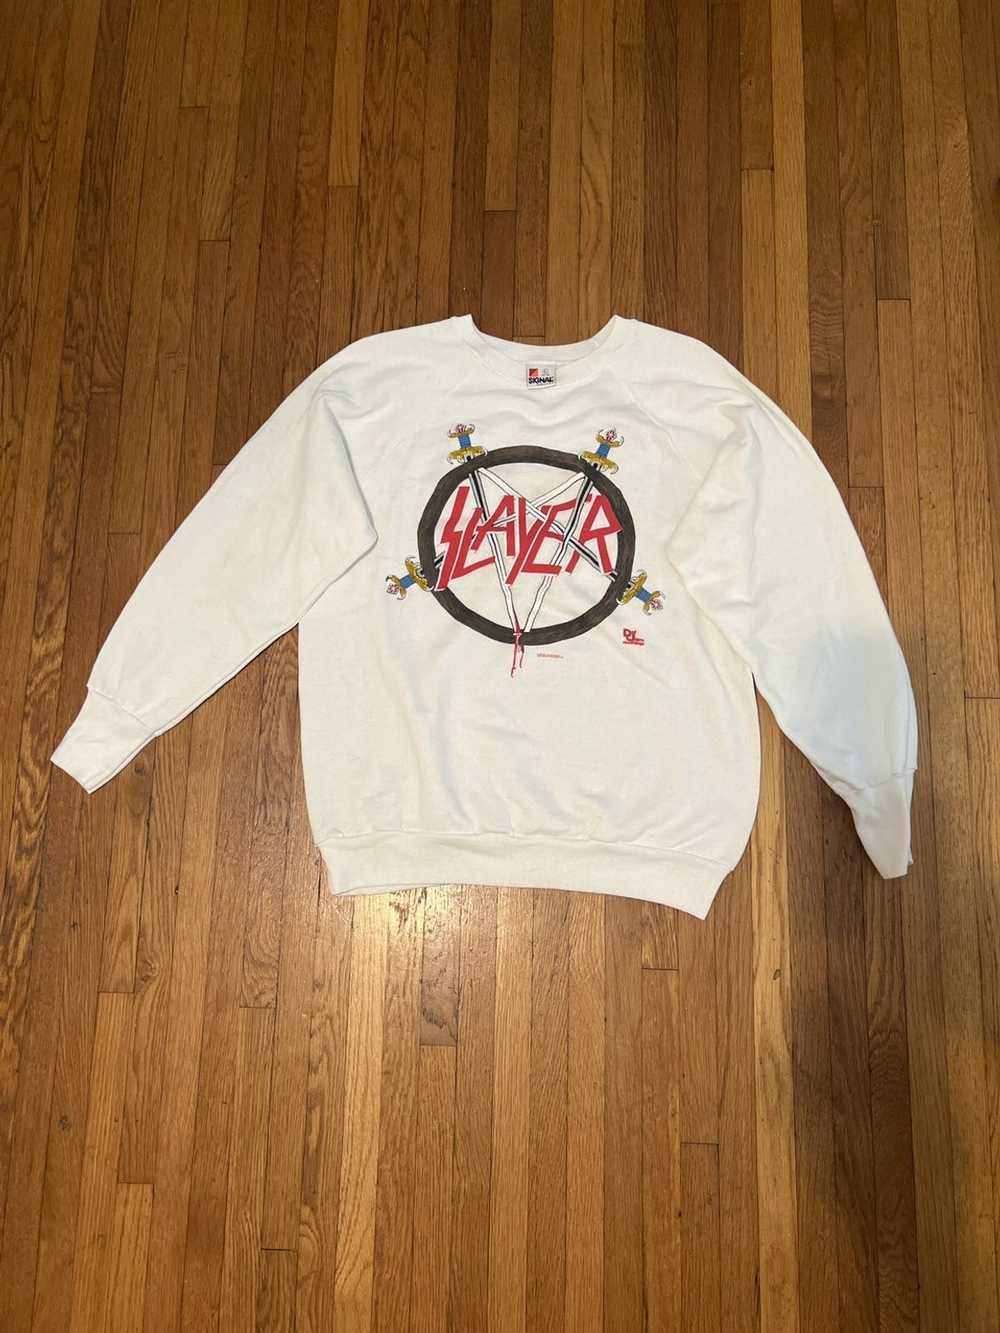 Slayer Slayer 1990 Sweater Def Jam on a Signal Tag - image 2